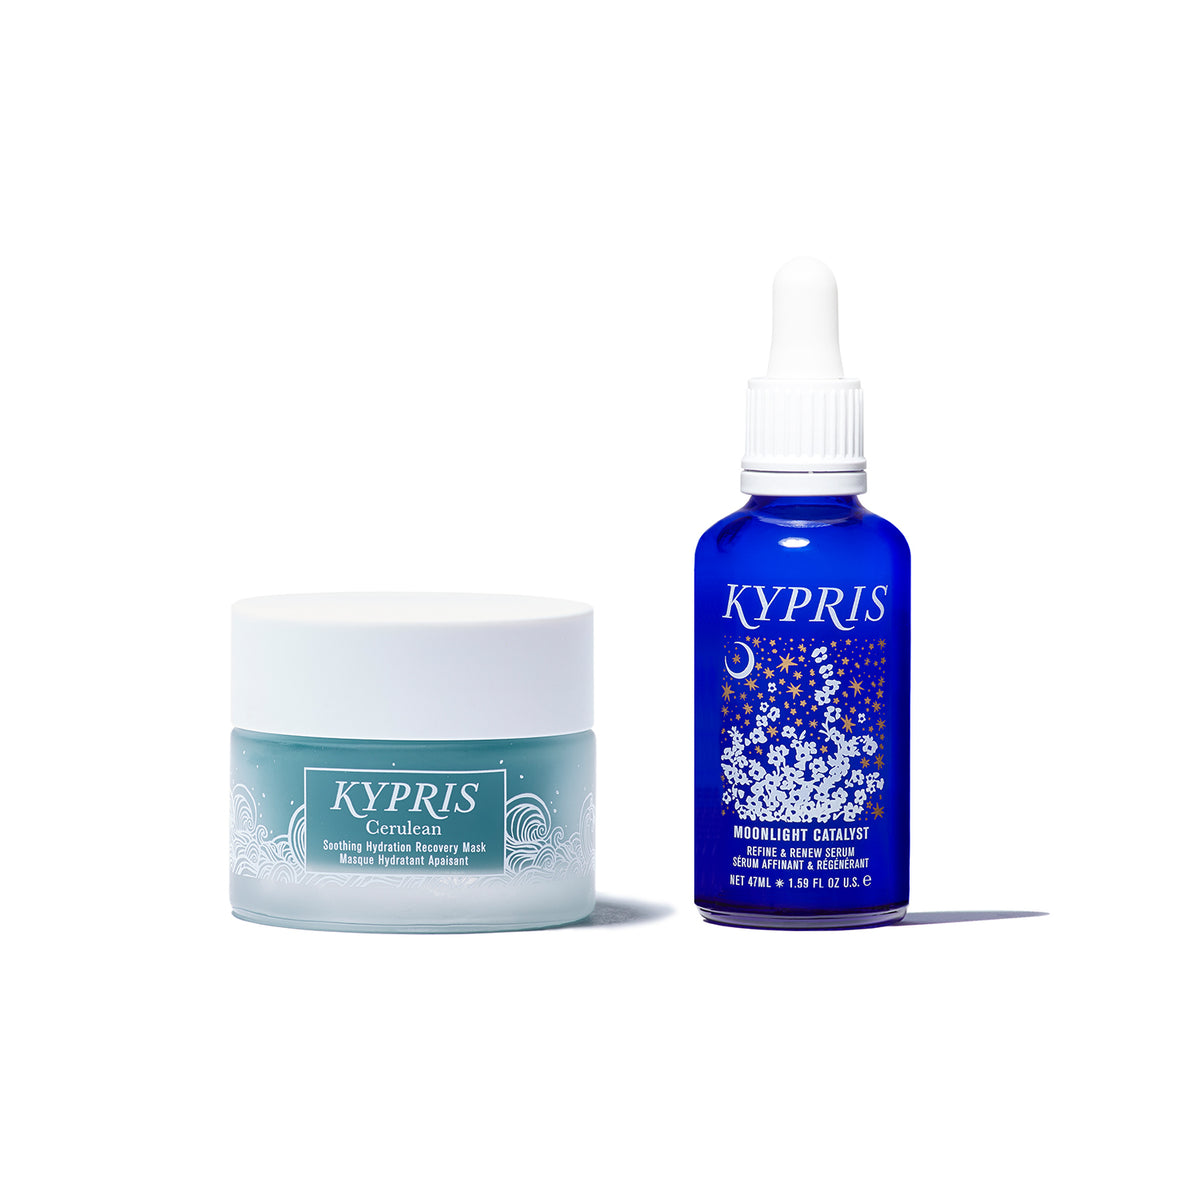 Cerulean Soothing Hydration Mask and Moonlight Catalyst Refine and Renew Serum